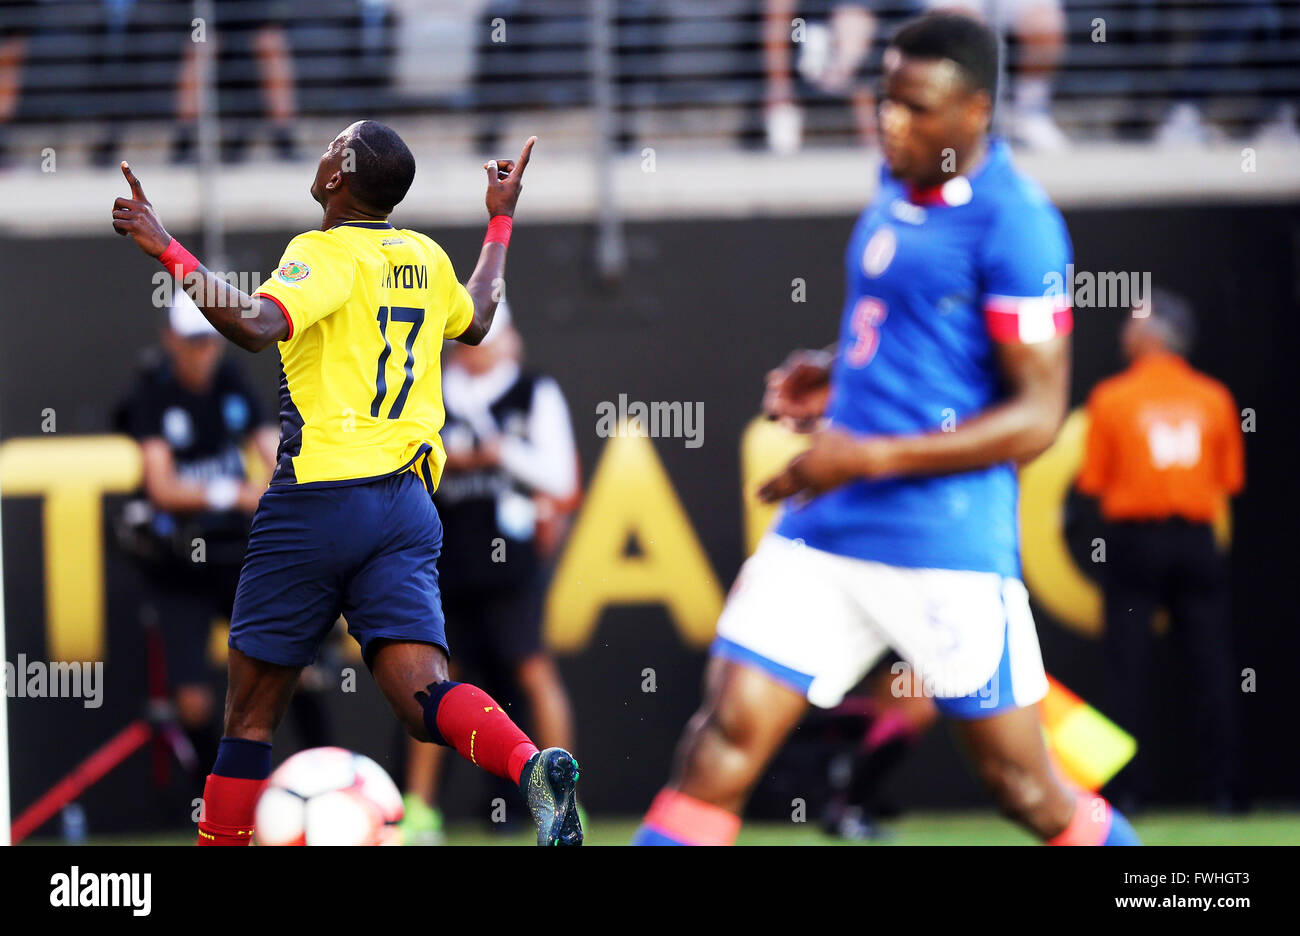 New Jersey, USA. 12th June, 2016. Jaime Ayovi (L) of Ecuador celebrates after scoring during the Copa America Centenario football tournament match against Haiti in East Rutherford, New Jersey, United States, on June 12, 2016. Ecuador won 4-0. Credit:  Qin Lang/Xinhua/Alamy Live News Stock Photo